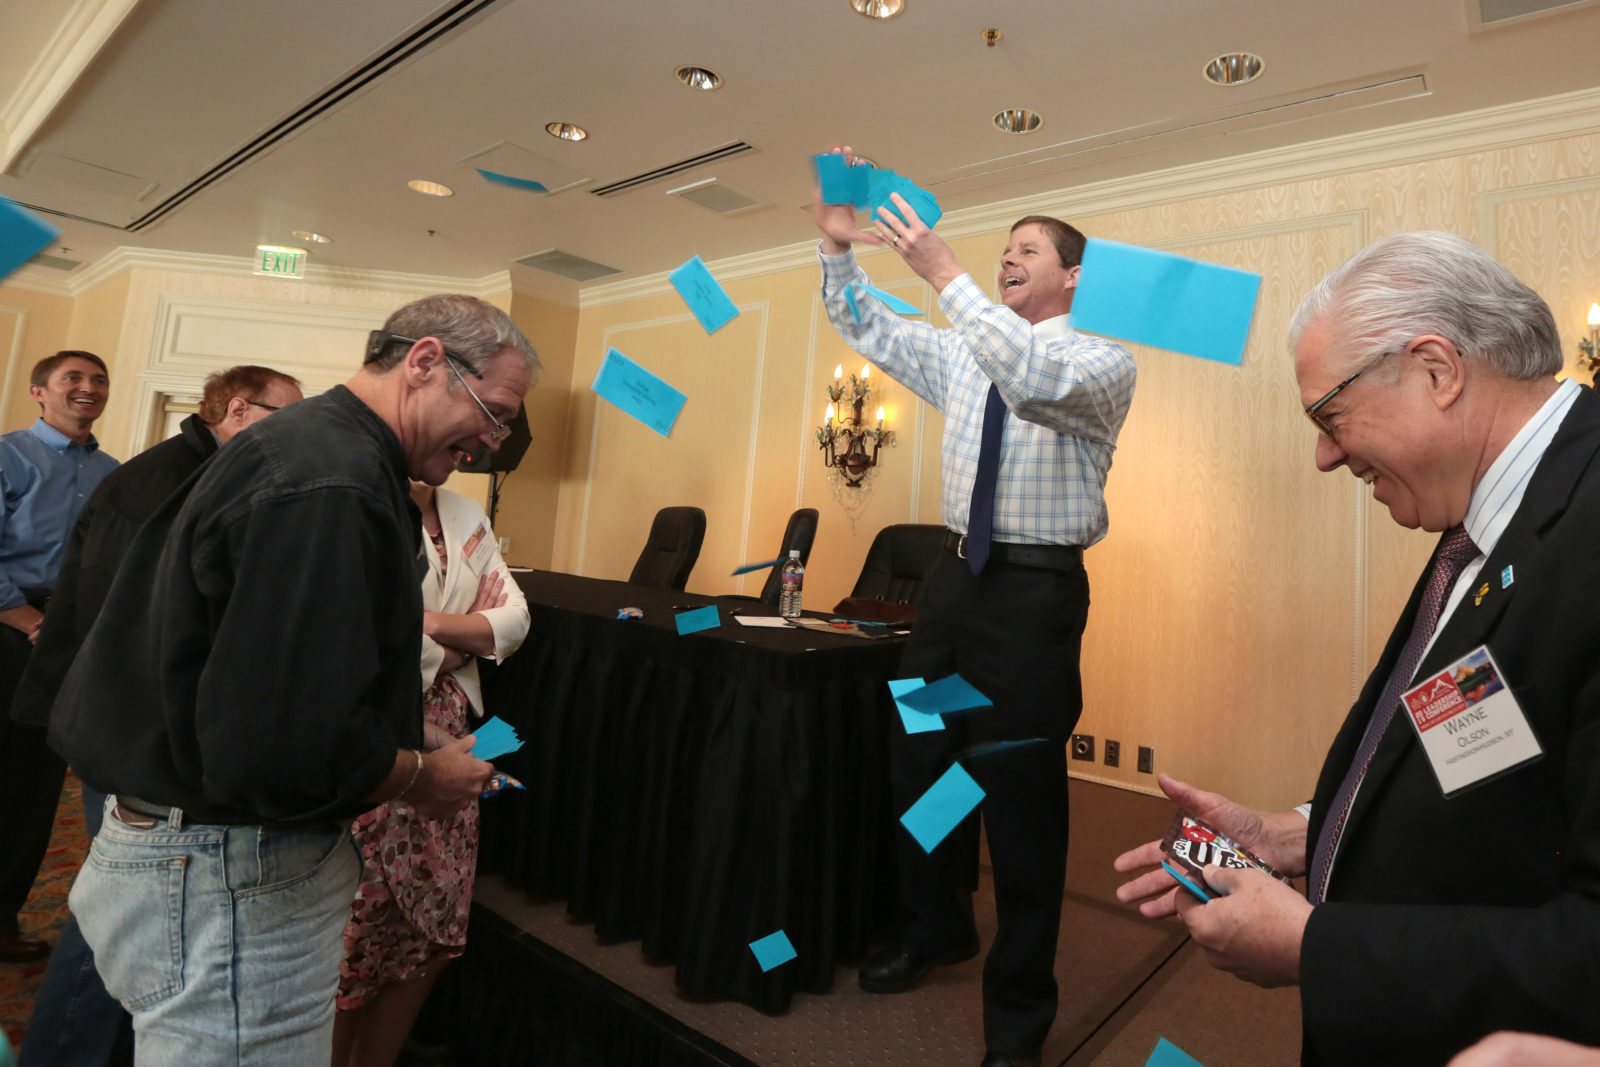 FTE Teacher Tom Rooney throws out a handful of "classroom bucks" during the conference's "Inside the Classroom" panel. Rooney showed how he uses this hands-on activity to help young students understand foreign exchange rates and world markets.